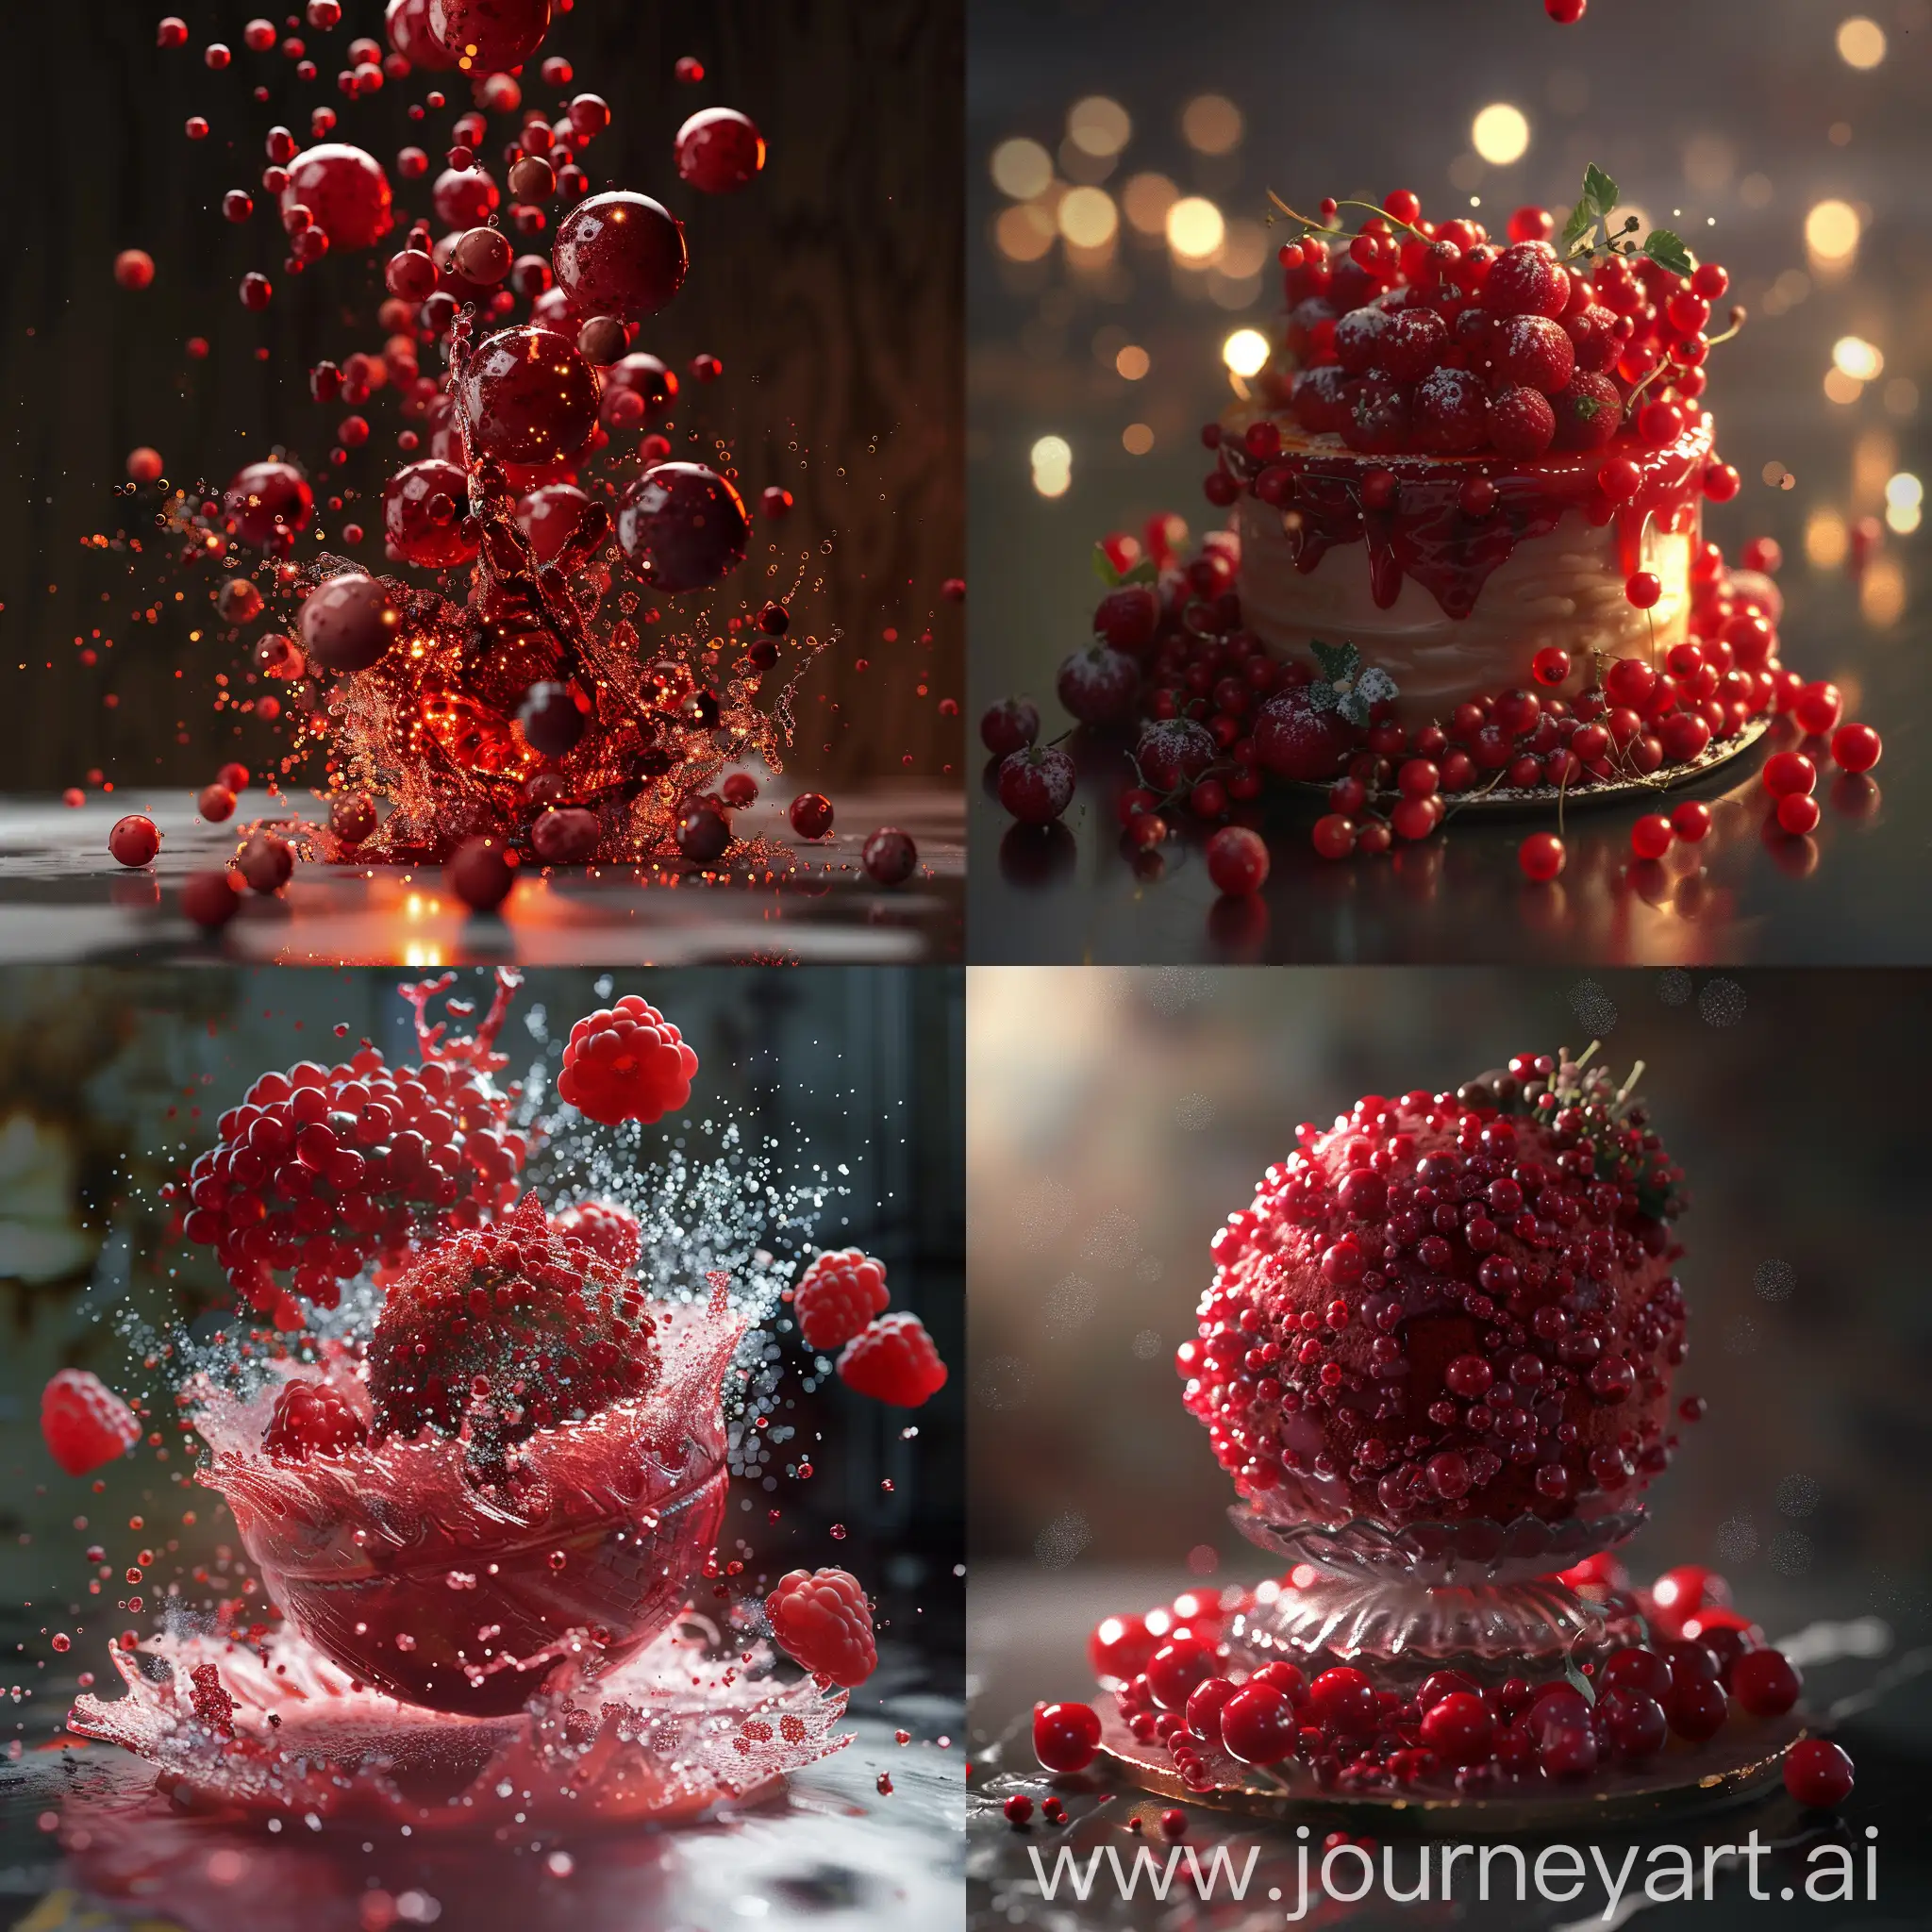 Sumptuous-Red-Berry-Fruit-Cake-Cinematic-Hyper-Maximalist-Photography-with-Dramatic-Lighting